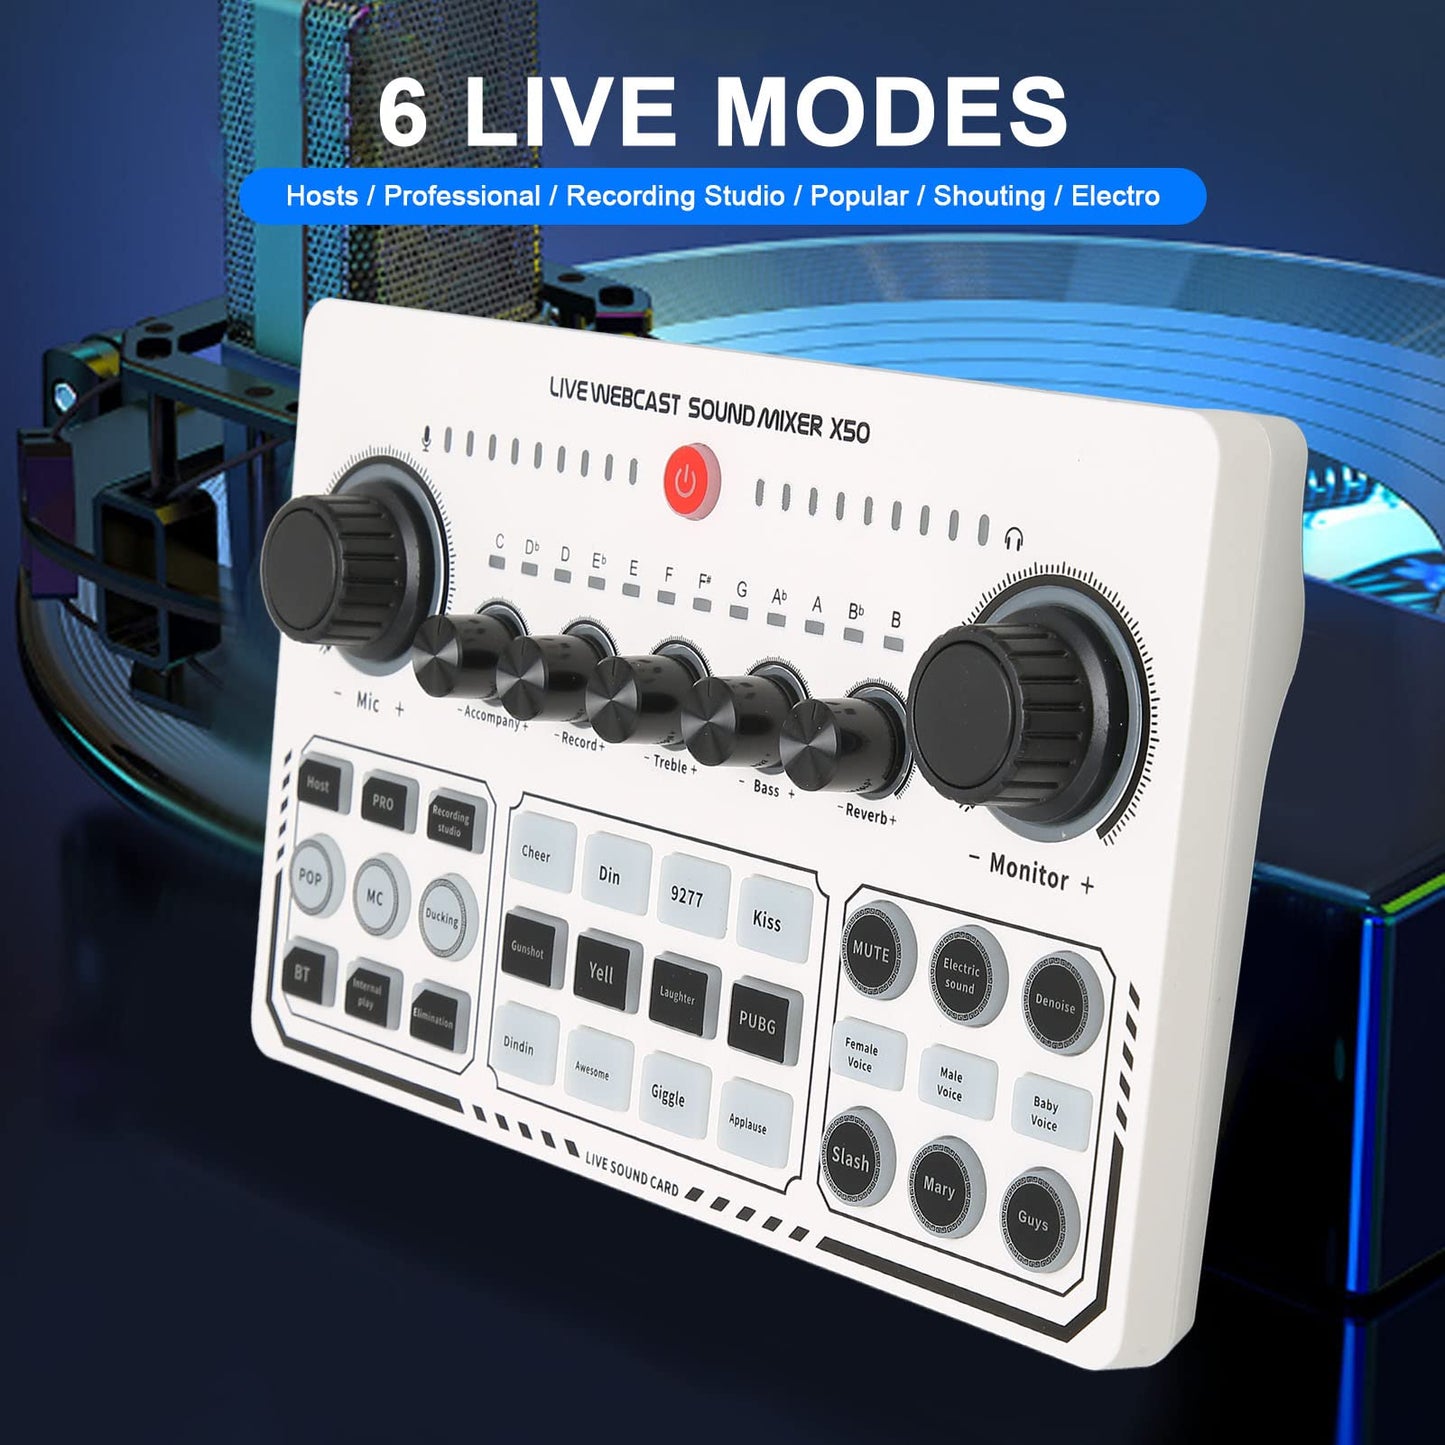 X50 Live Sound Card, 12 Warm Up Sound Effects One Touch Mute USB External Sound Card DJ Mixer for Live Streaming, PC, Recording